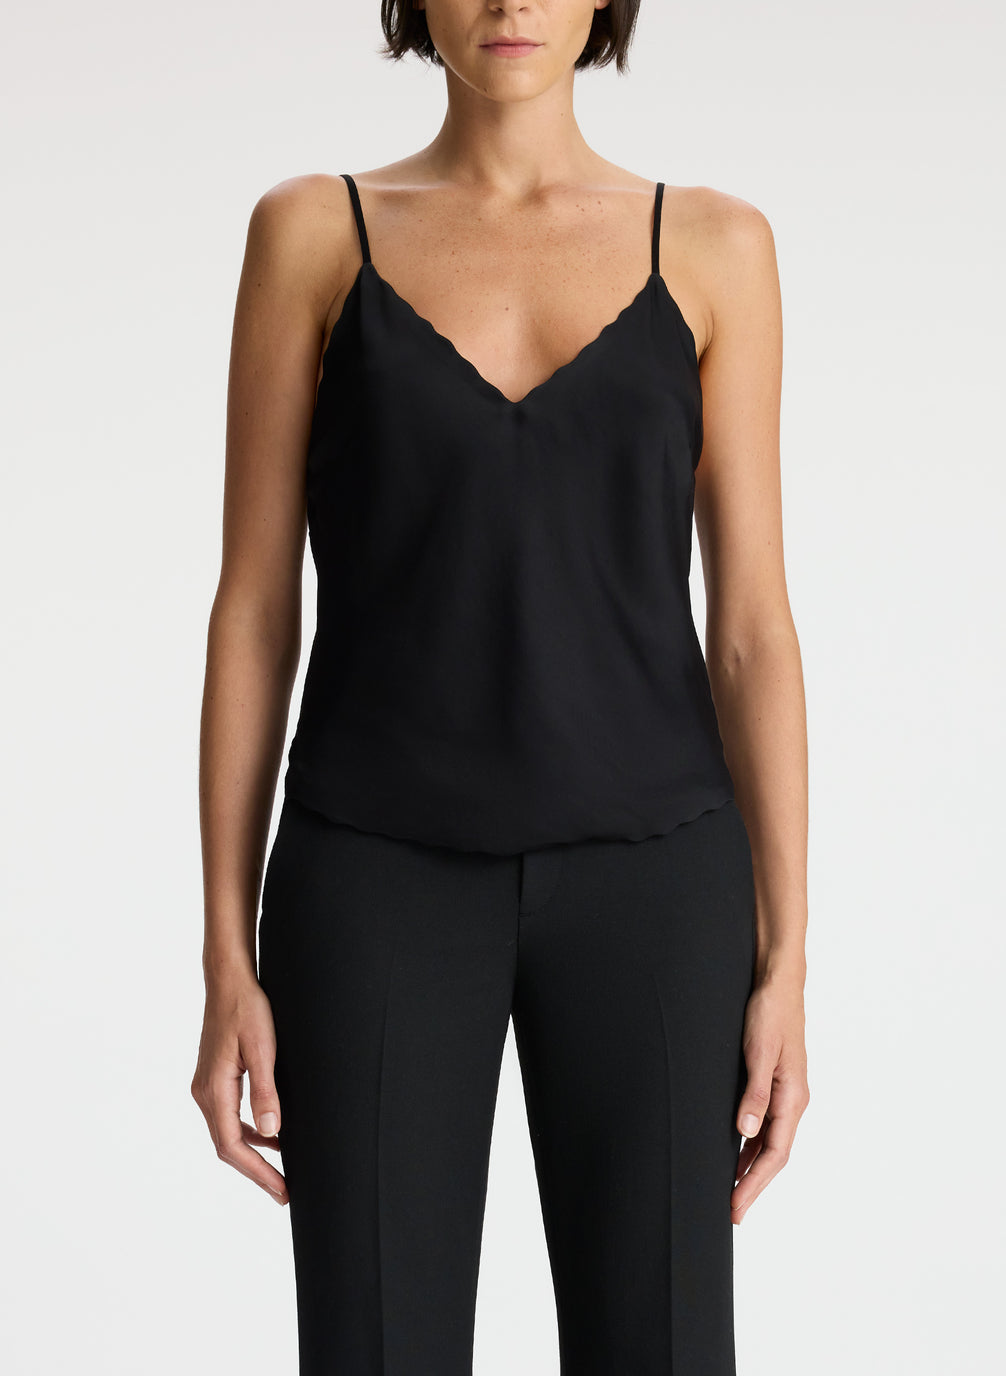 detail view of woman wearing black camisole and black flared pants